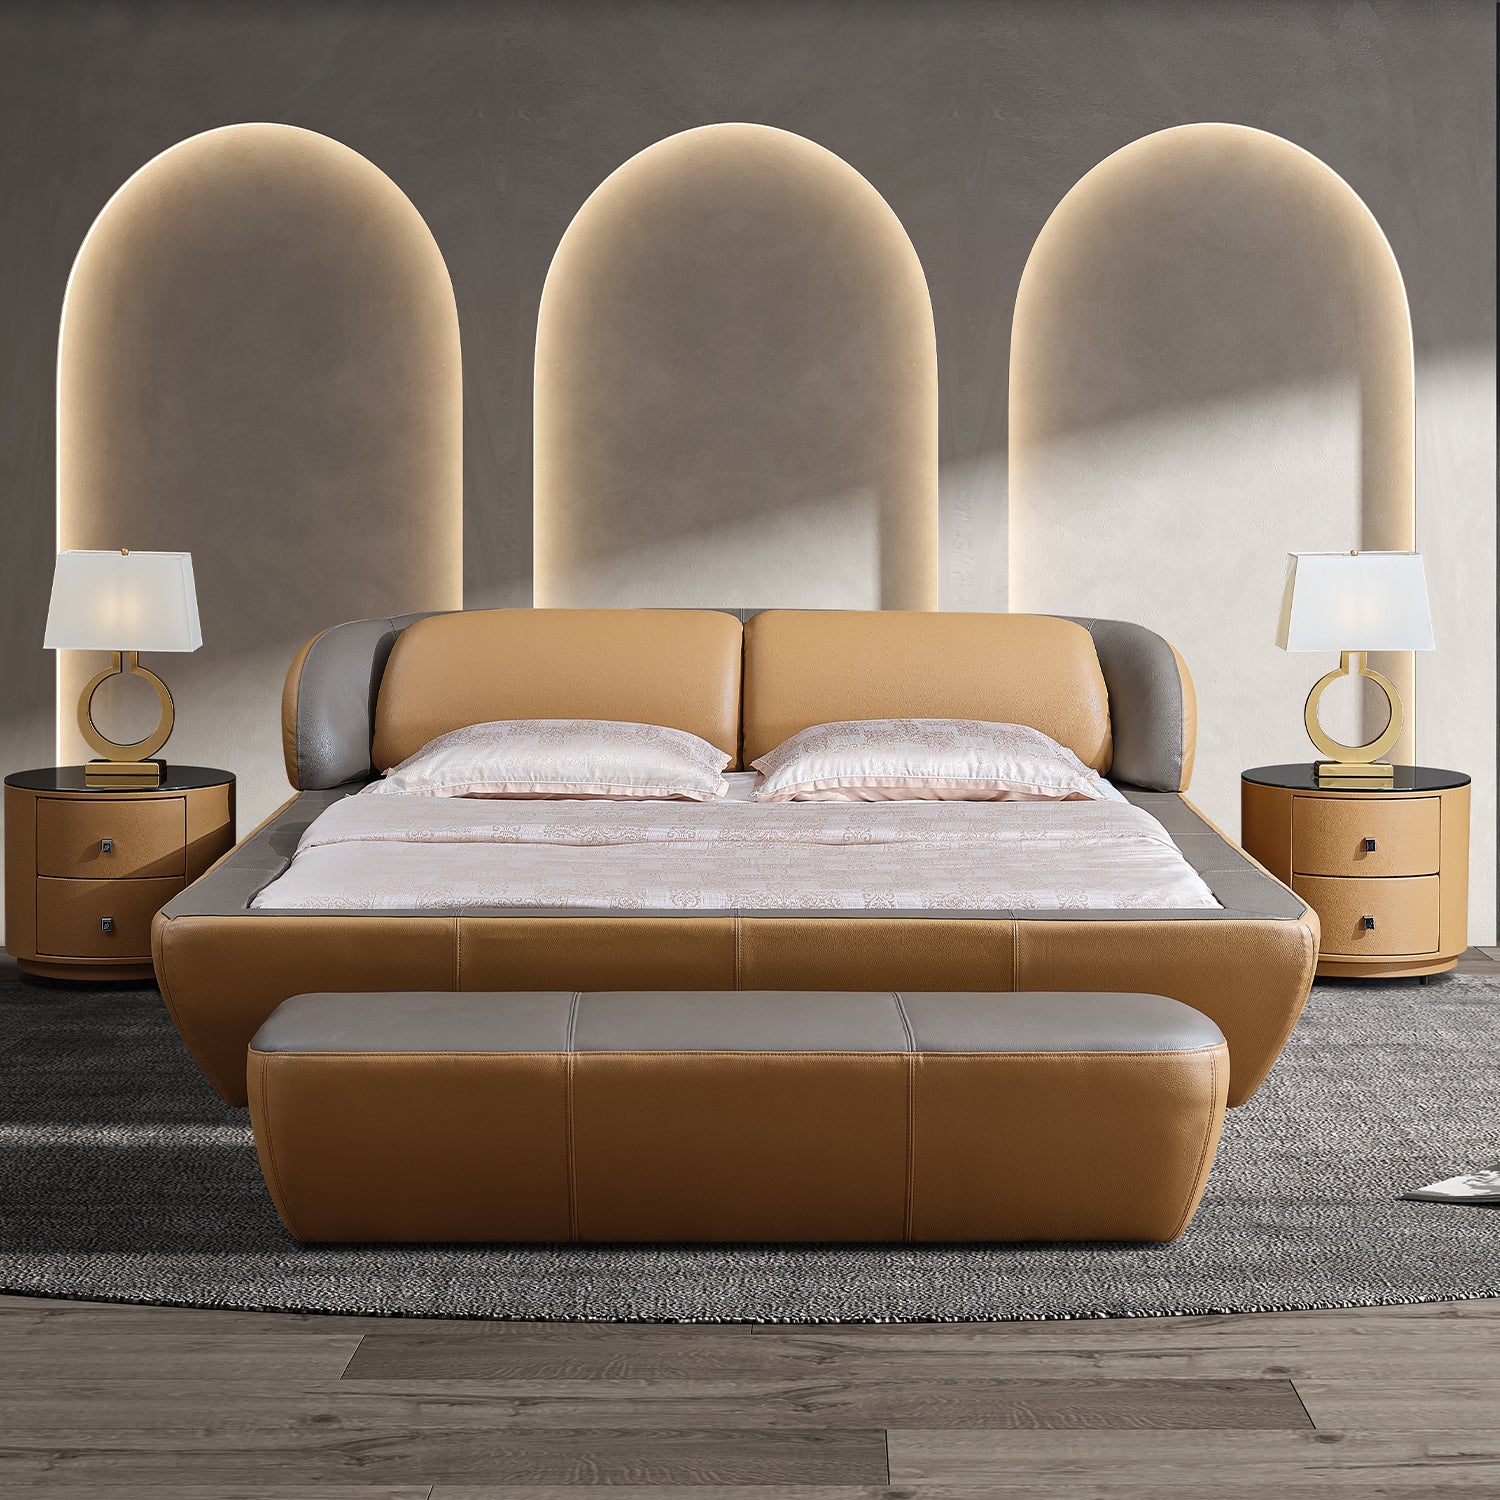 Bed Frame BZZ4-090 in bold orange and ash gray color scheme, flanked by two nightstands with modern table lamps, and three arched niches in the background, creating a luxurious and elegant bedroom setup.